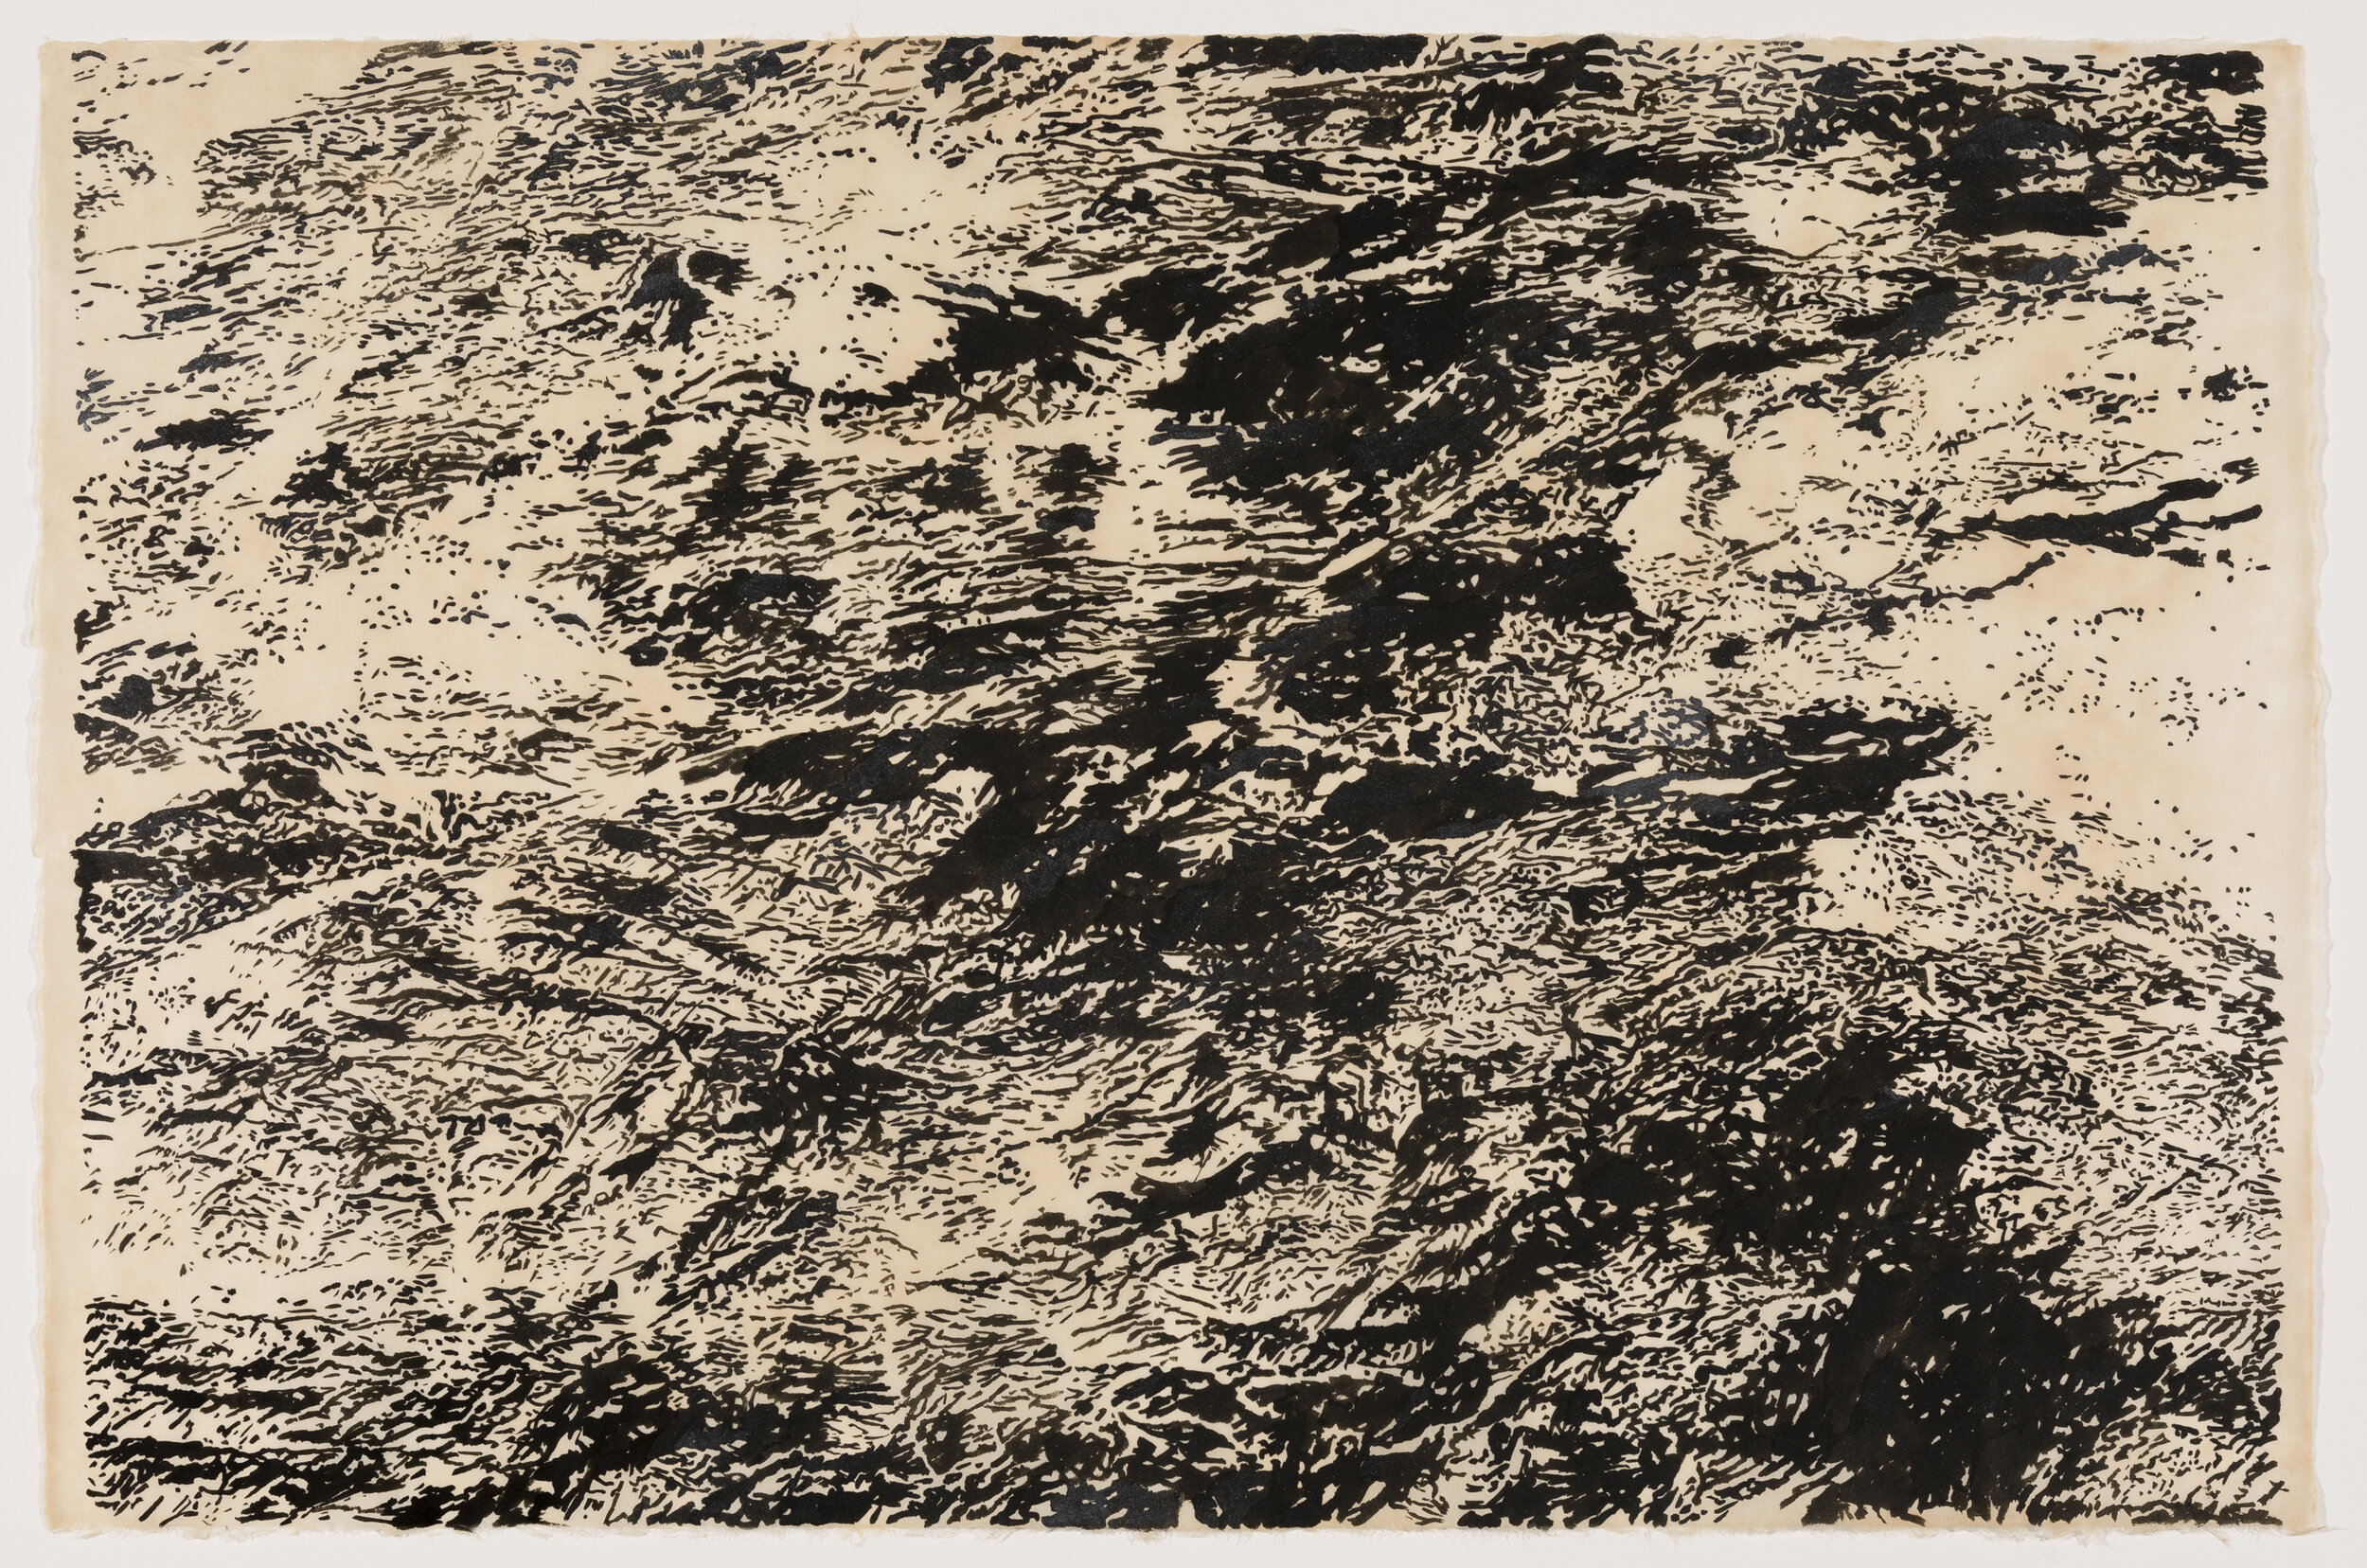    Jabal Thawr 1, Saudi Arabia, 2019   Sumi ink with silver on persimmon dyed kozo paper 25” x 38”  